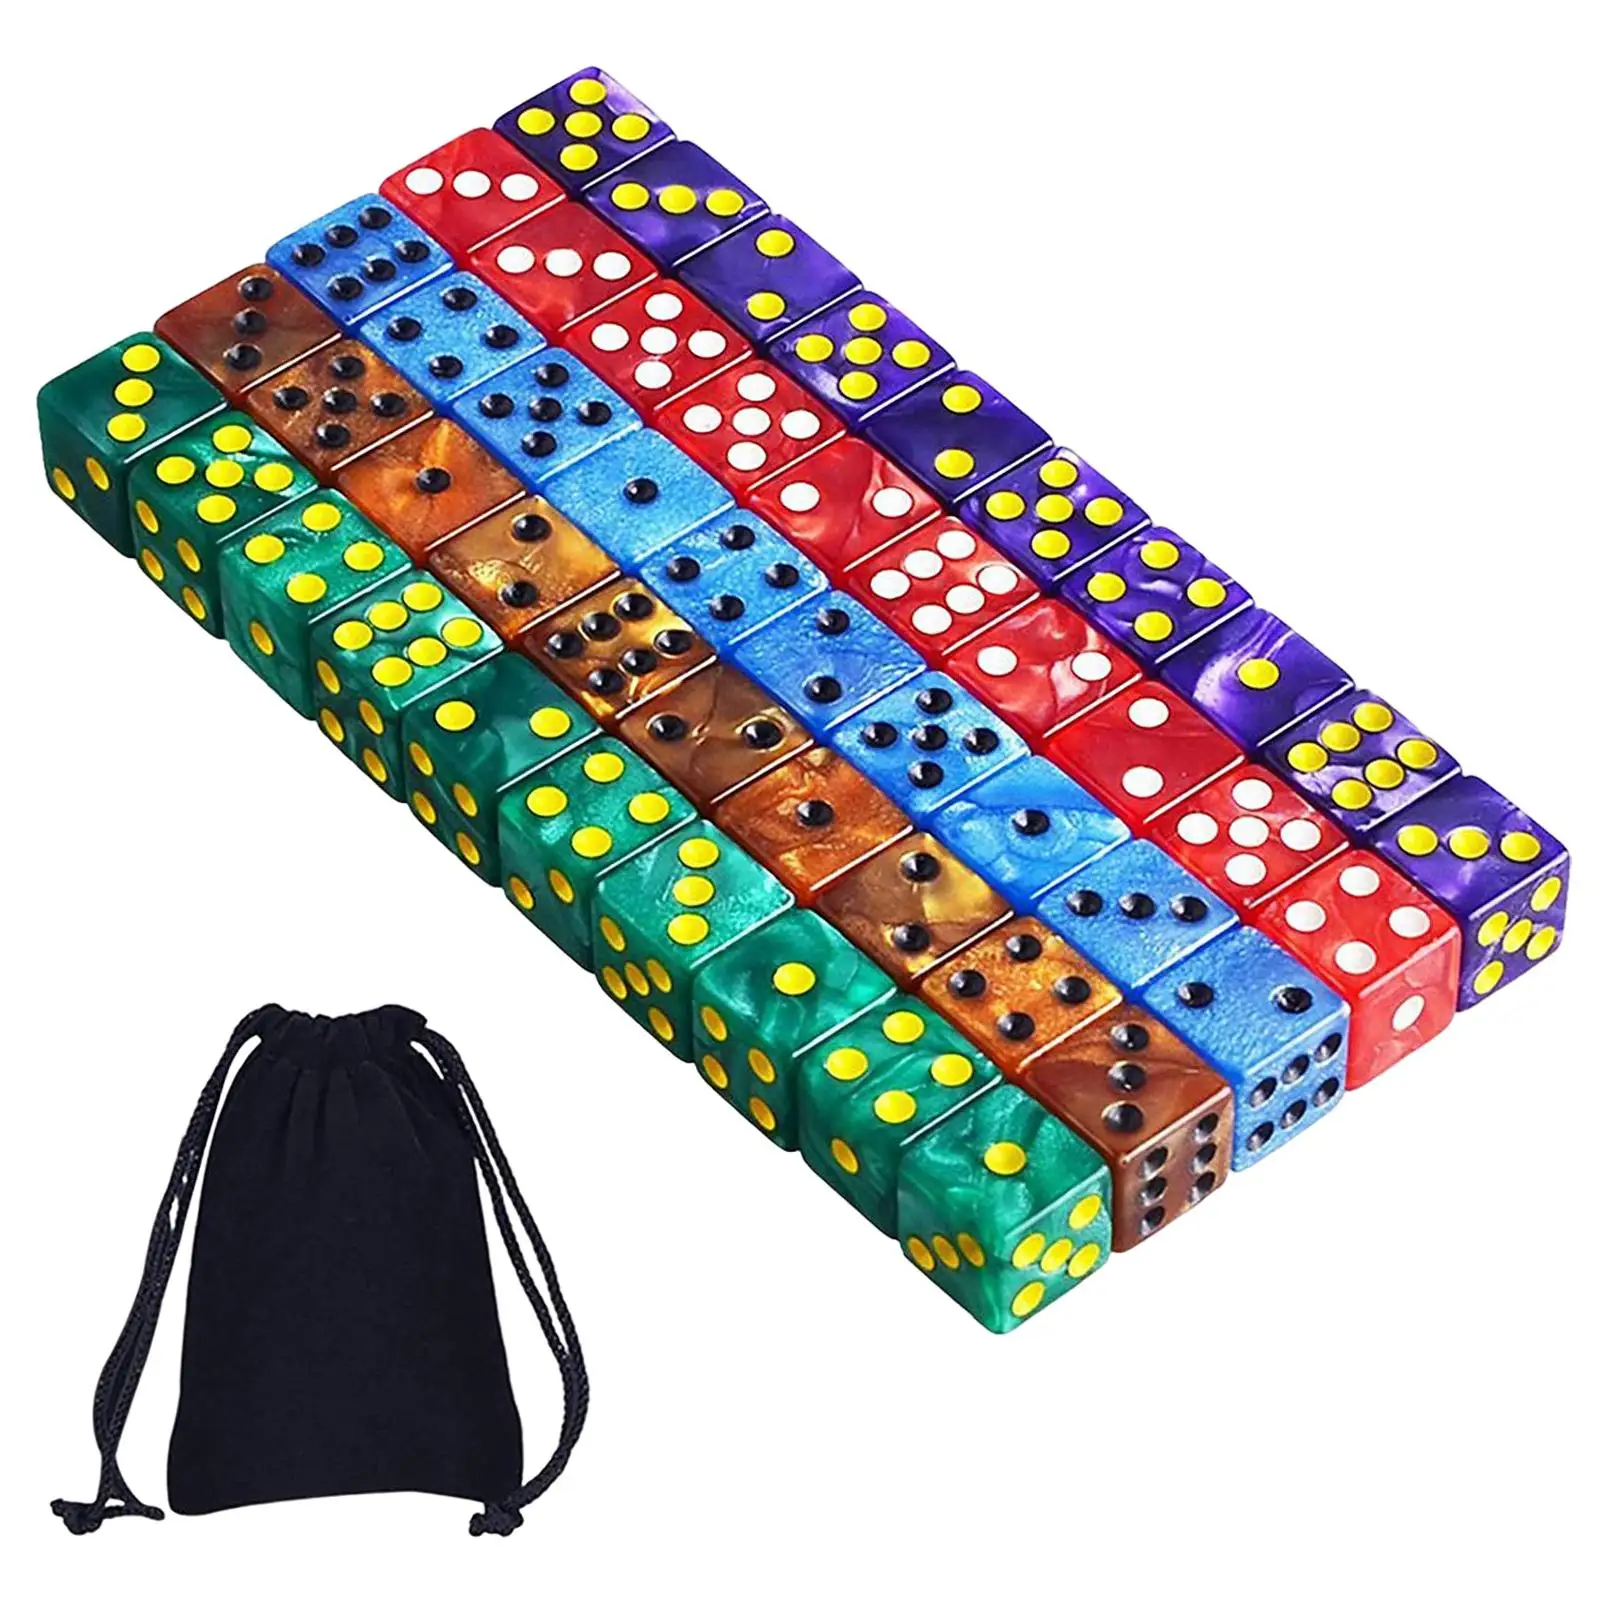 50x Polyhedral Dices Game Dices Party Favors Math Counting Teaching Aids 6 Sided Dices Set for Board Game